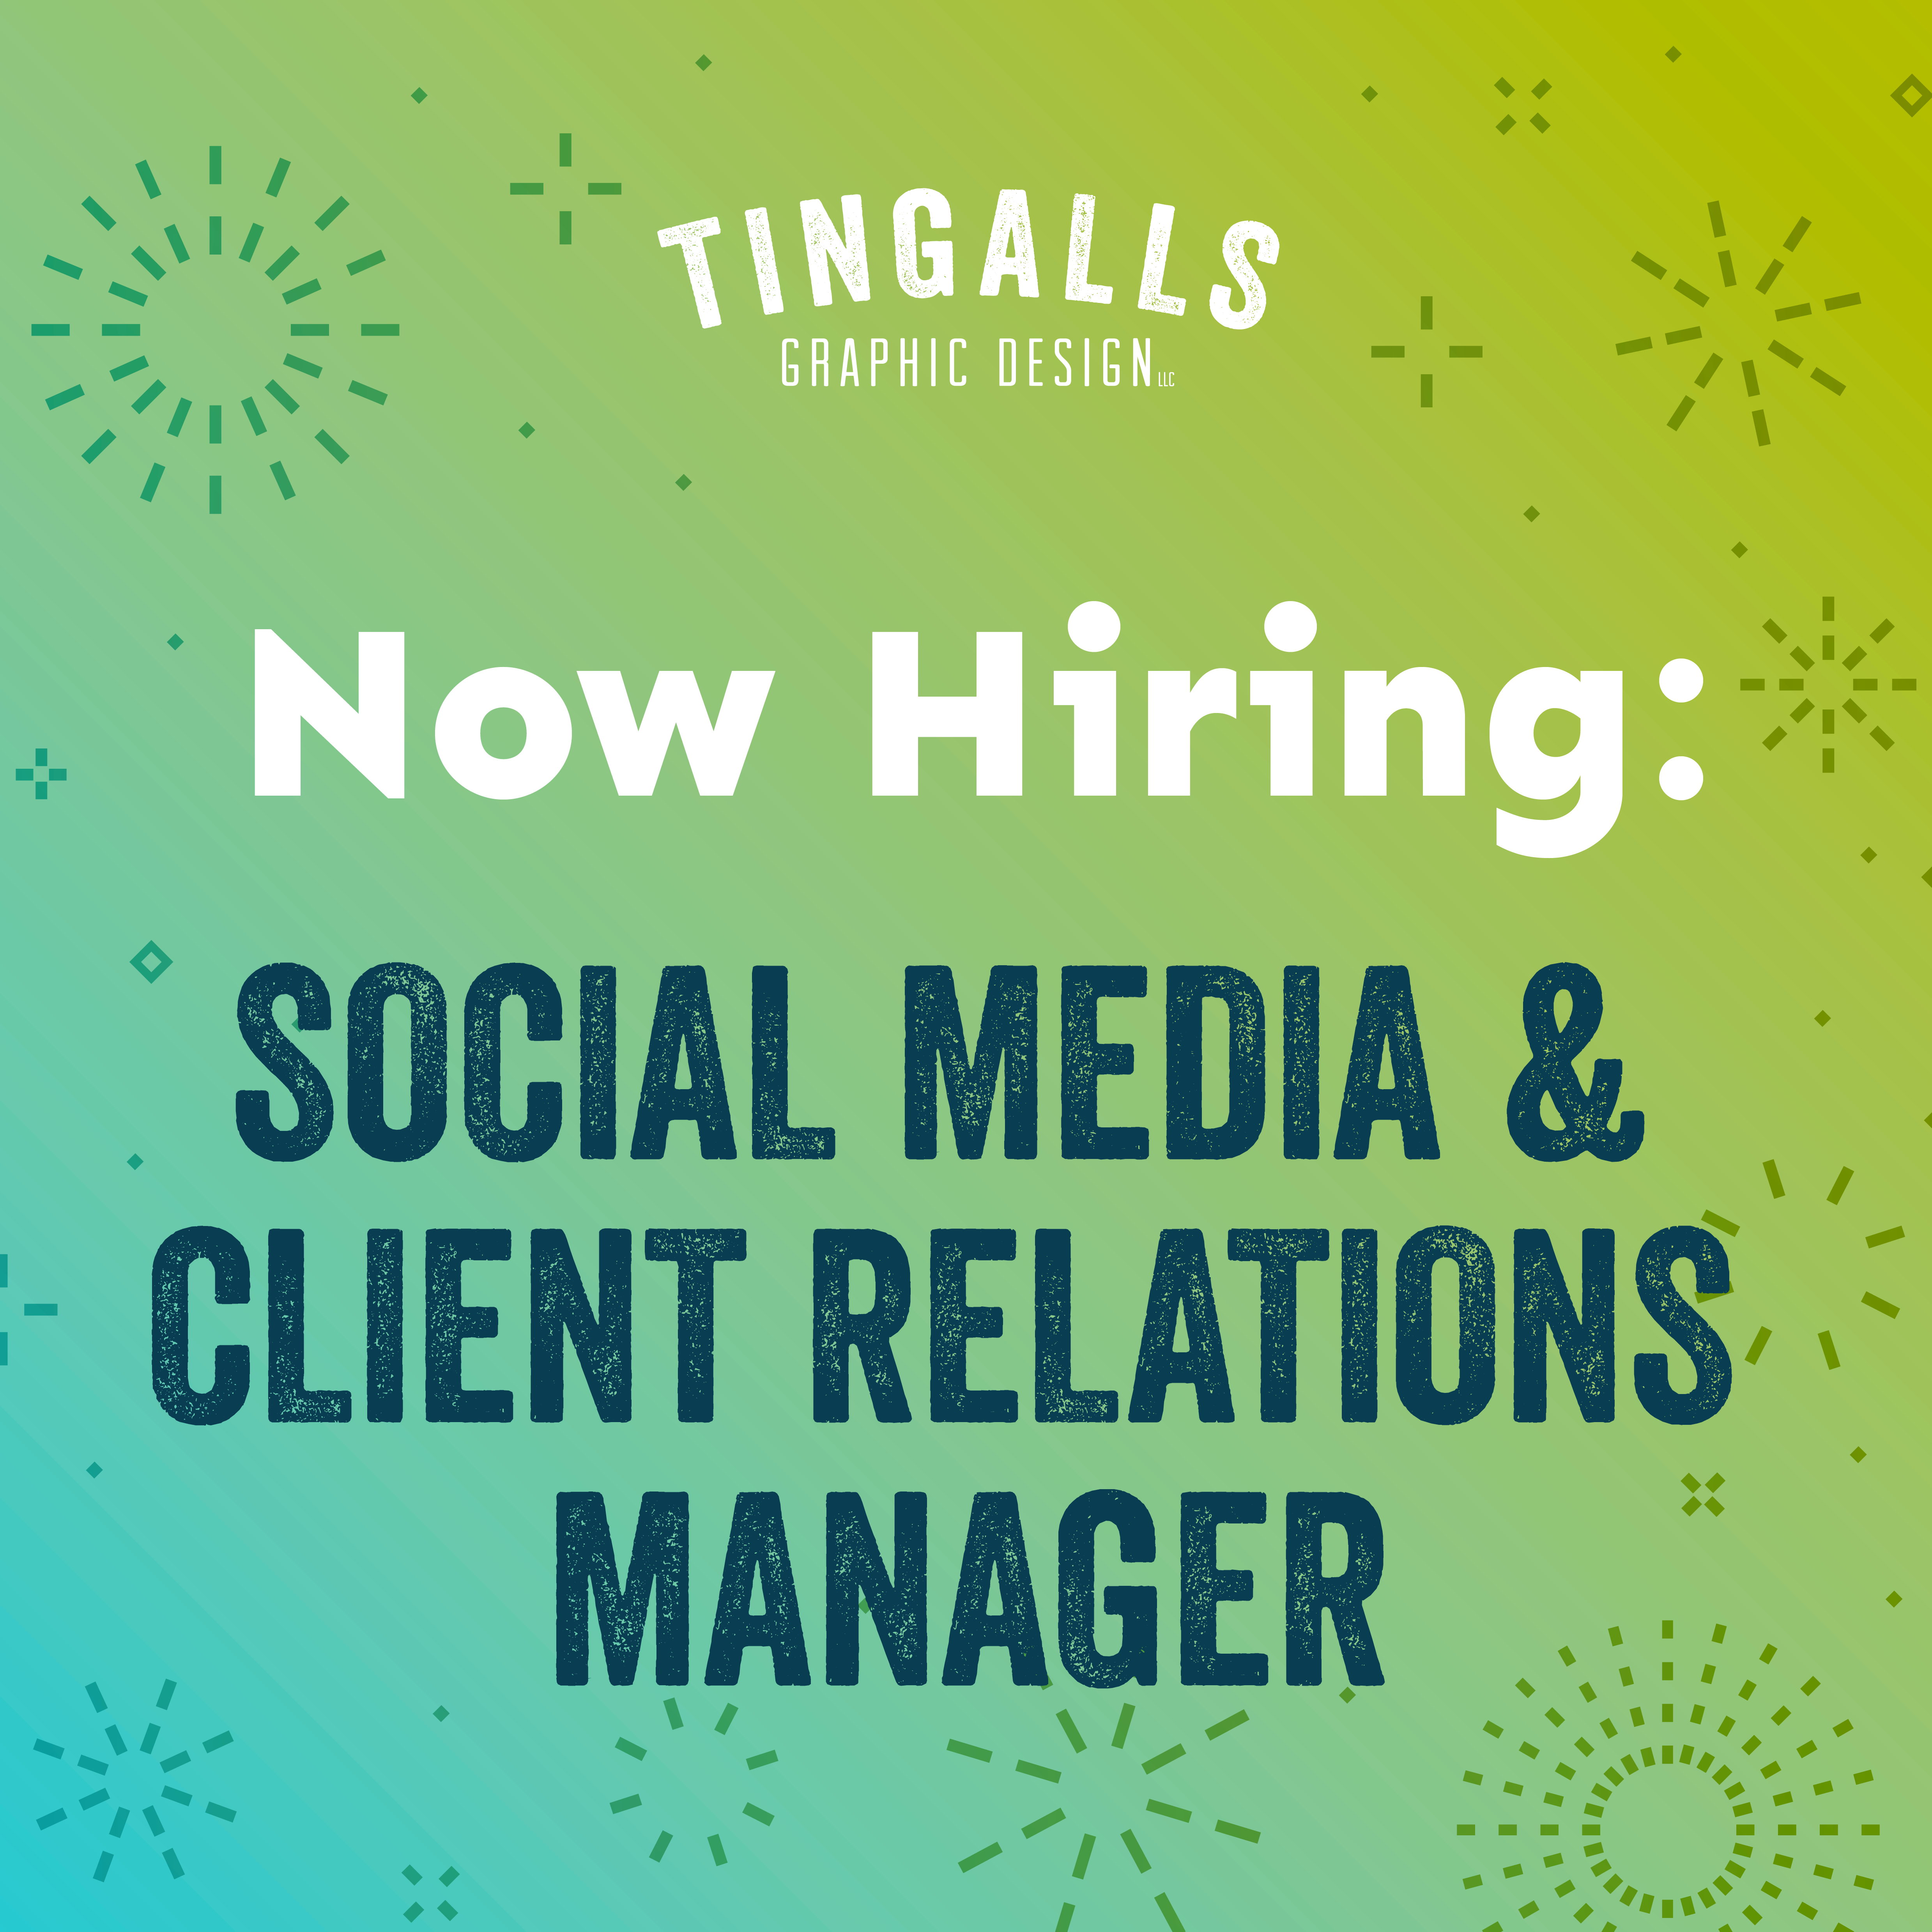 tingalls now hiring social media content creator and client relations manager